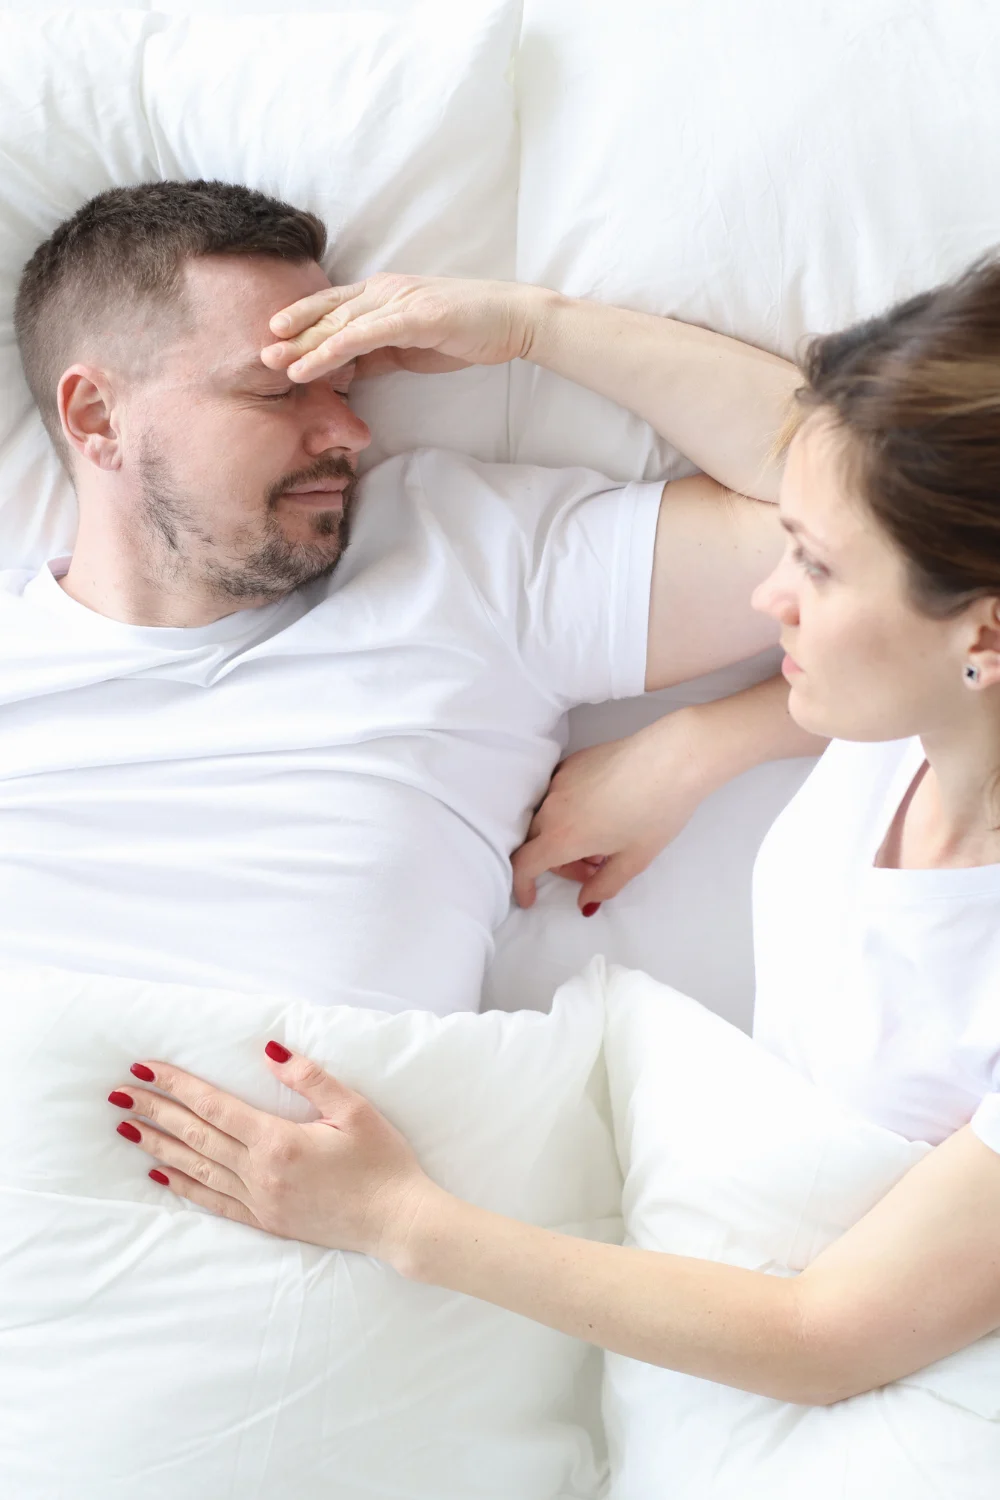 My Husband Loves Me But Not Sexually